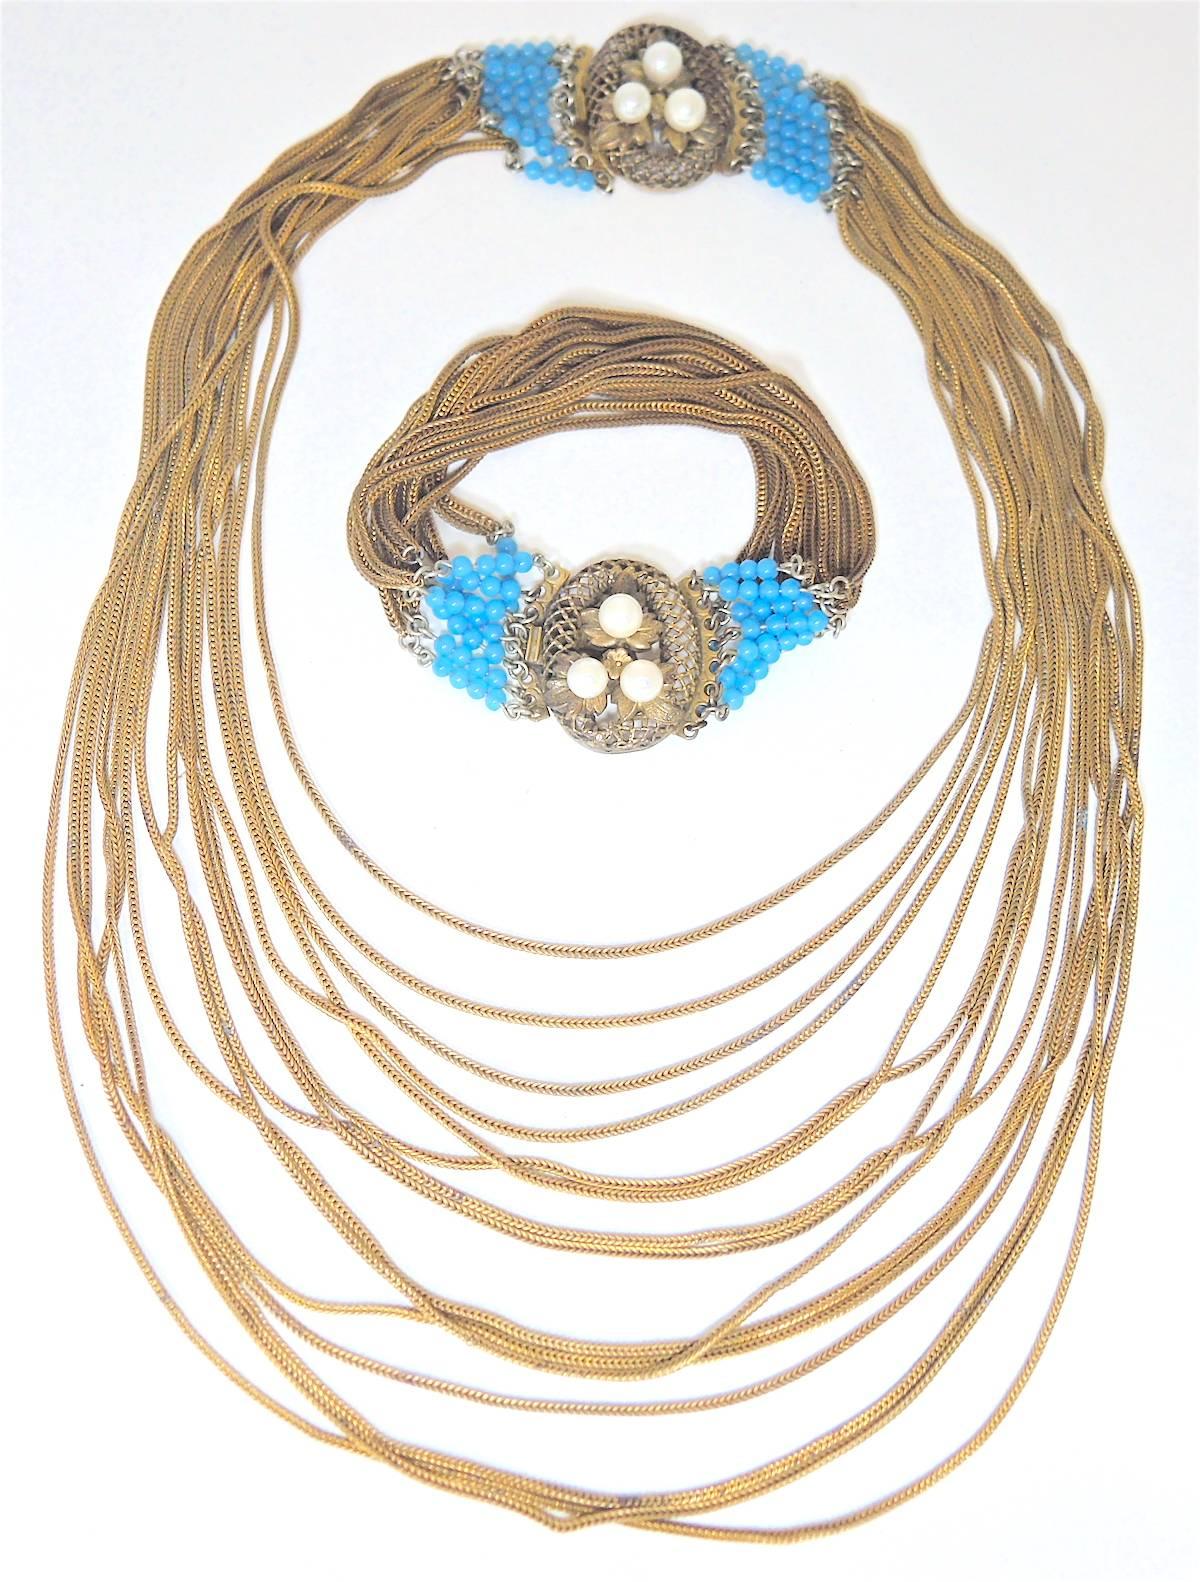 This vintage Victorian necklace is layered with chains that graduate downward.  The necklace is accented with faux turquoise beads on both sides of an oval slide in clasp with 3 faux pearls set on golden leaves. The necklace measures 16” x 1”.  The